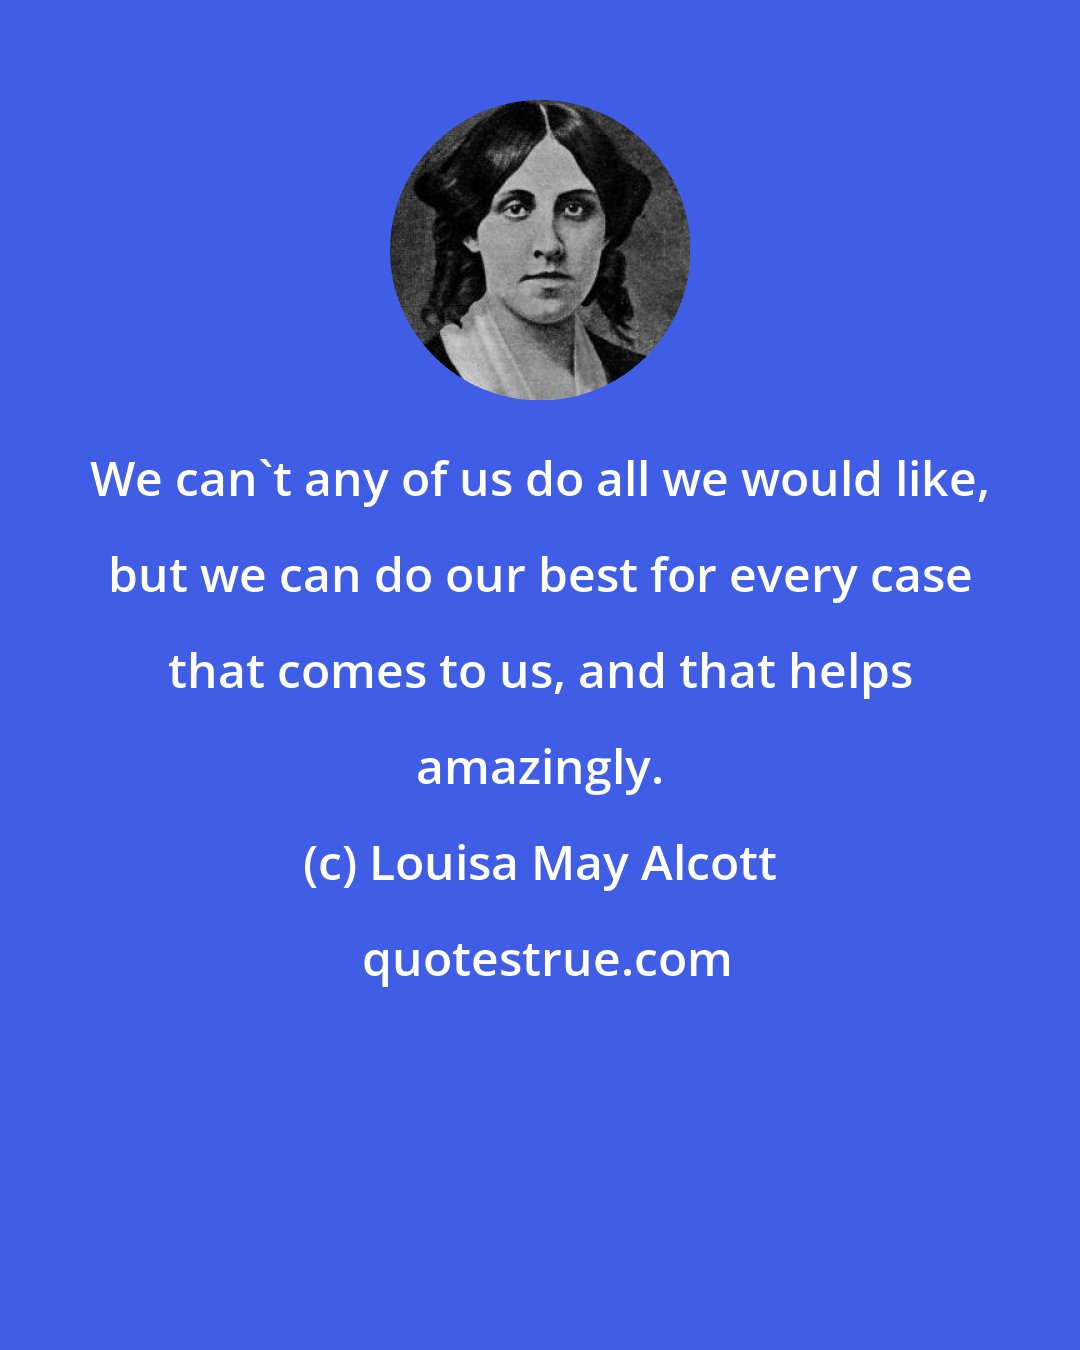 Louisa May Alcott: We can't any of us do all we would like, but we can do our best for every case that comes to us, and that helps amazingly.